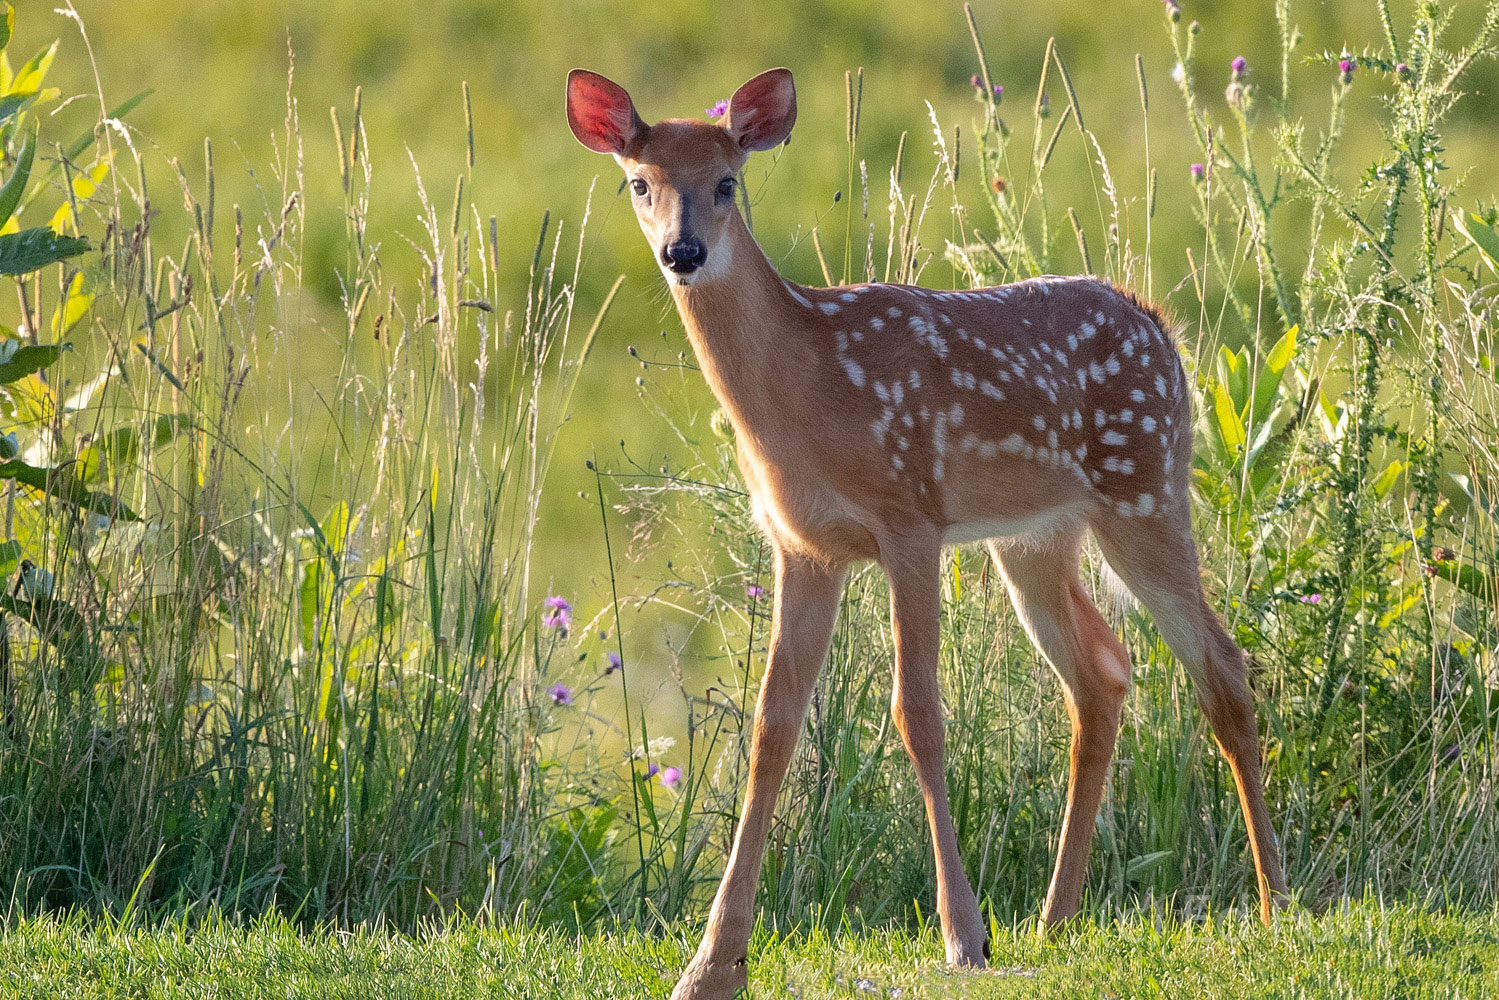 Fawn are inherently curious during their first weeks.